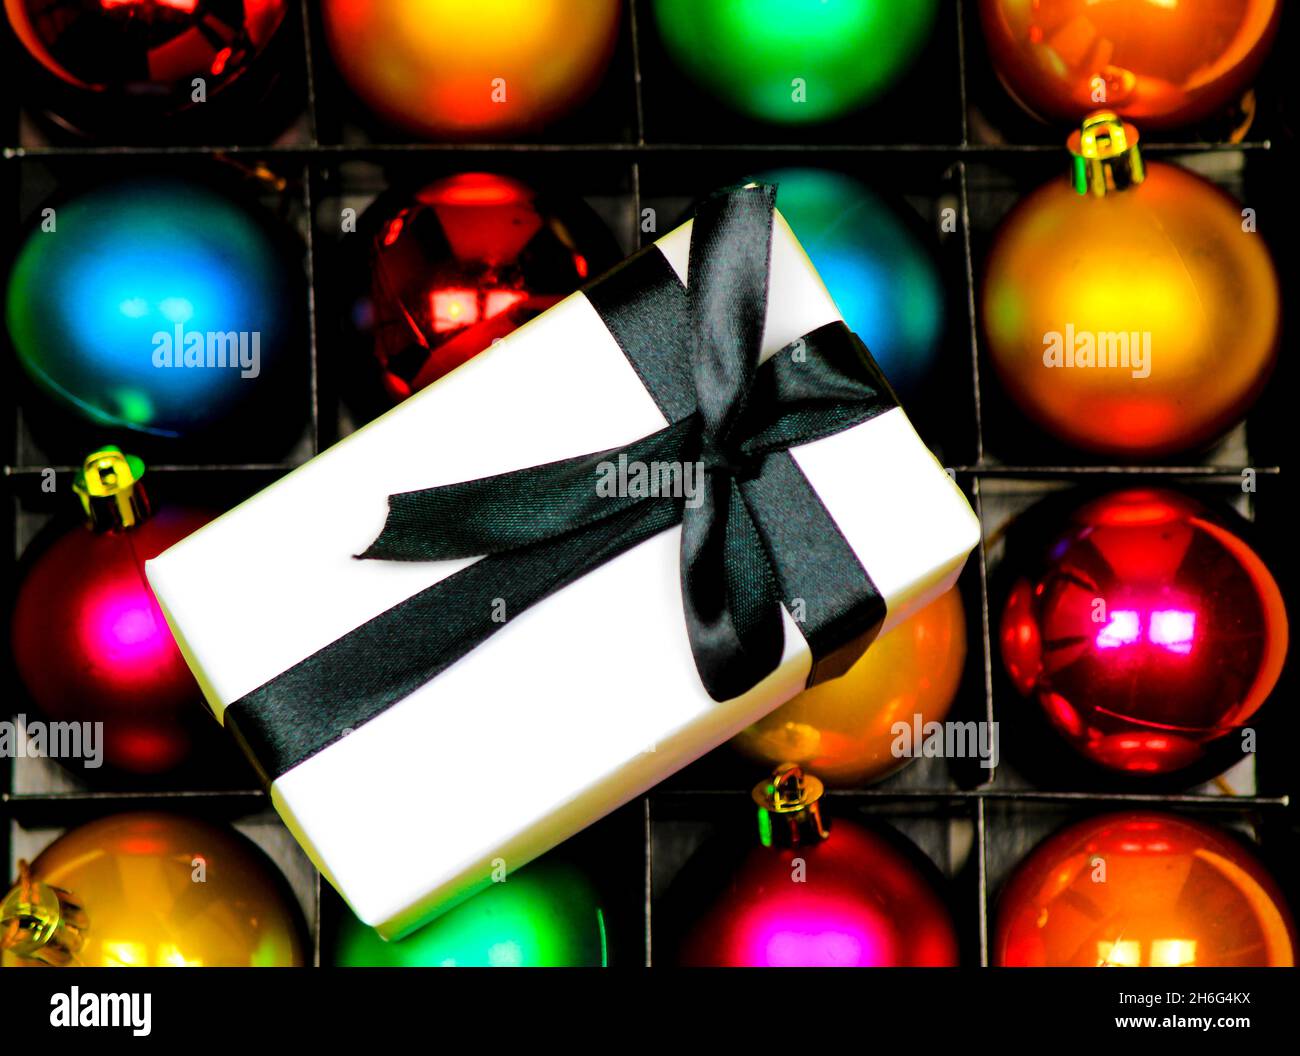 Gift wrapped with white paper and black bow on multicolor Christmas balls Stock Photo